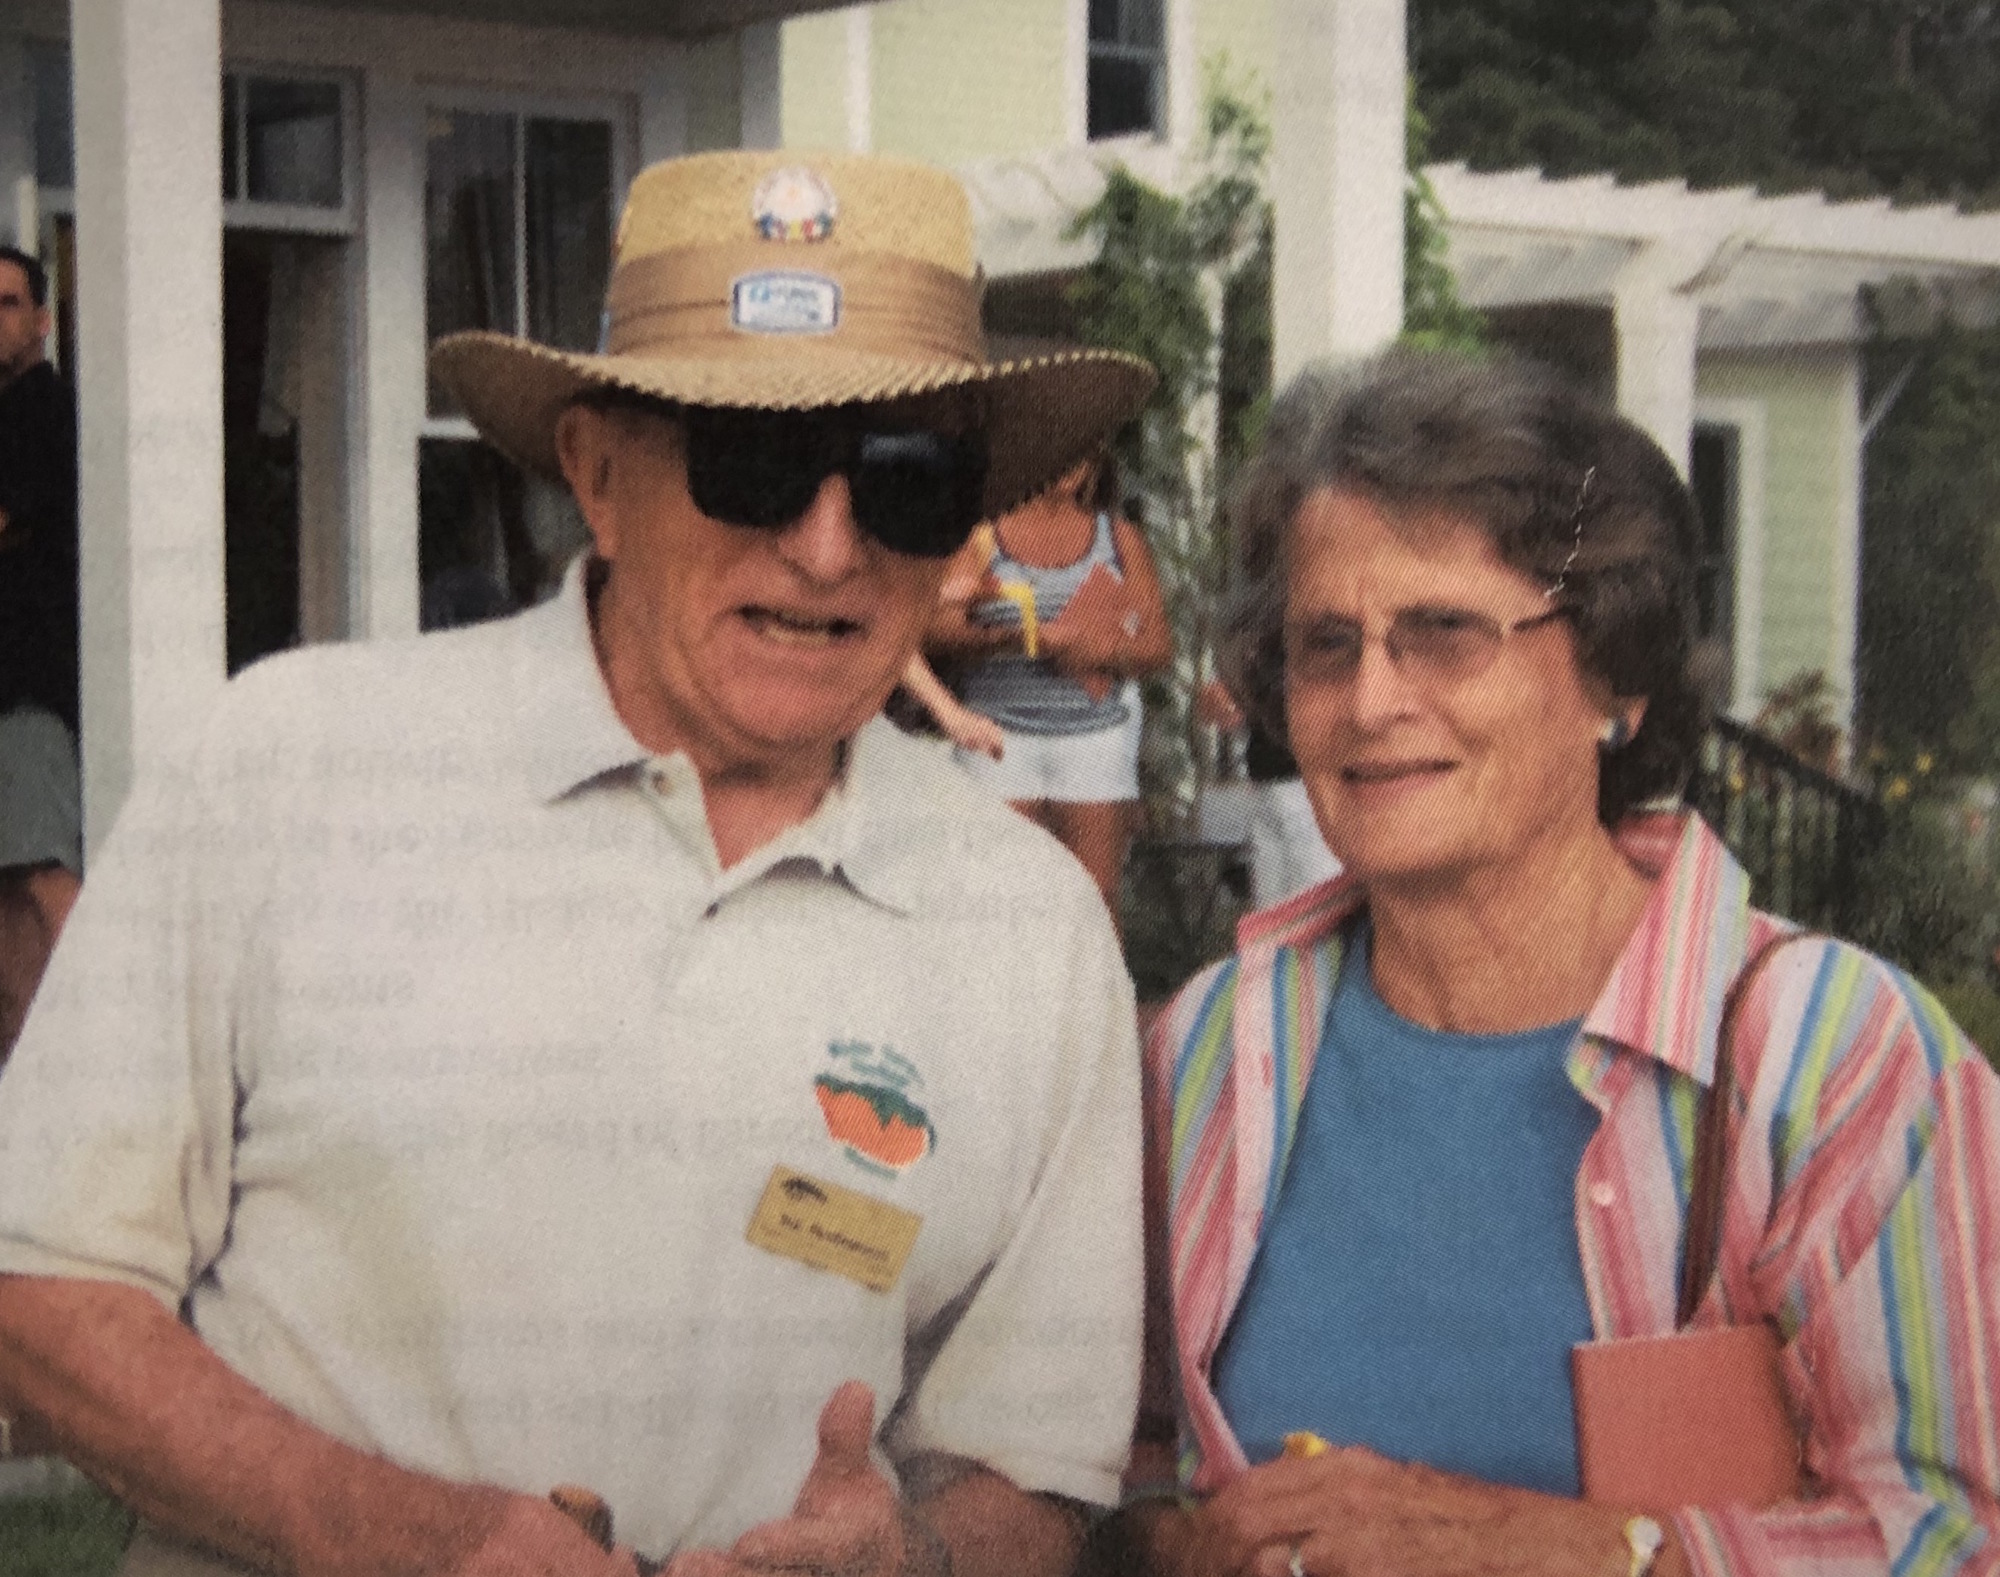 Ted Van Deventer and Anne Bailey volunteered together regularly.